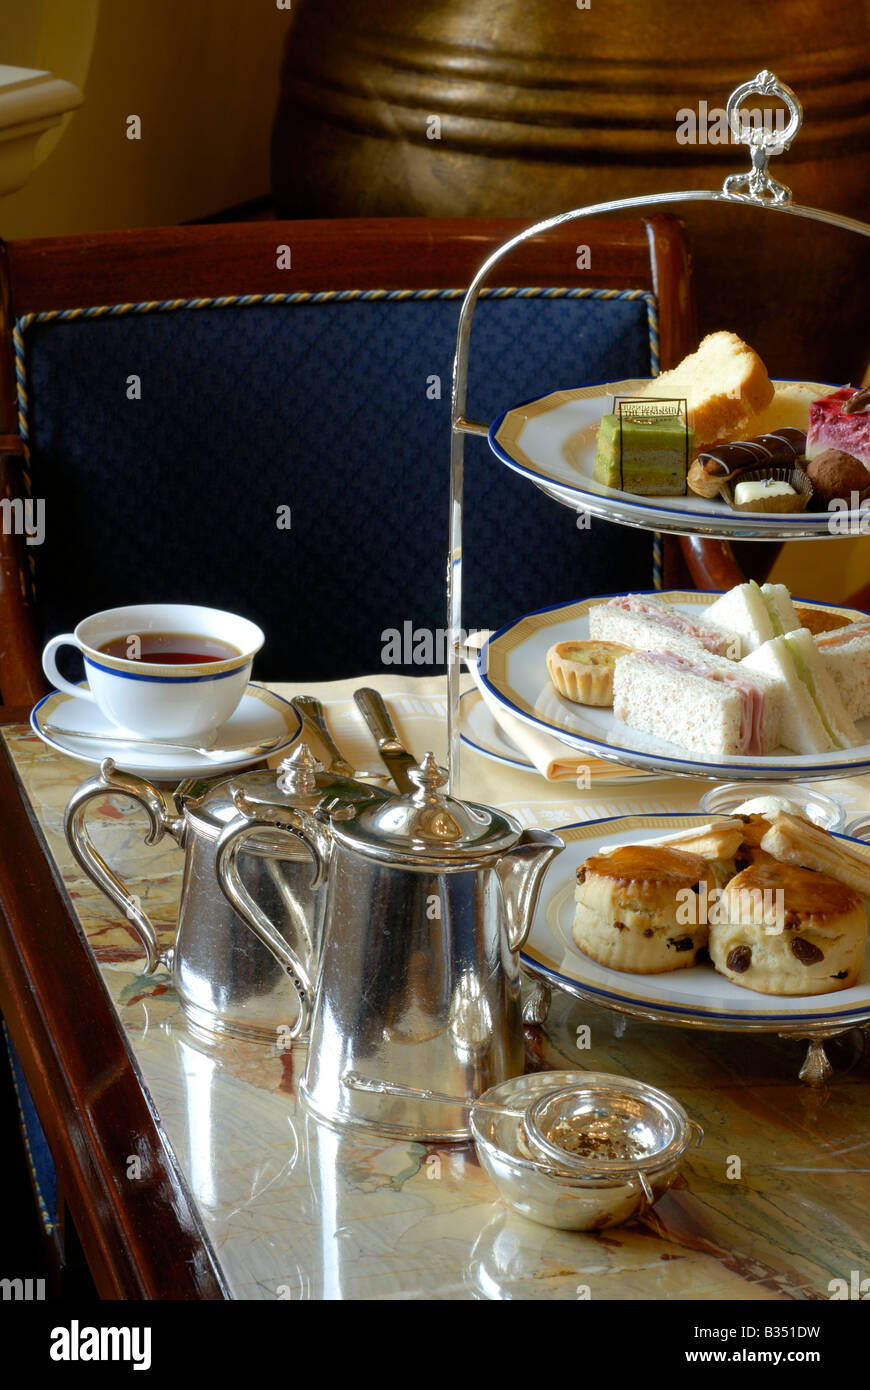 Peninsula Hotel Hong Kong. Afternoon tea. luxury hotel. Tea in the lobby of the Peninsula Hotel.  Cakes, scones and Sandwiches Stock Photo